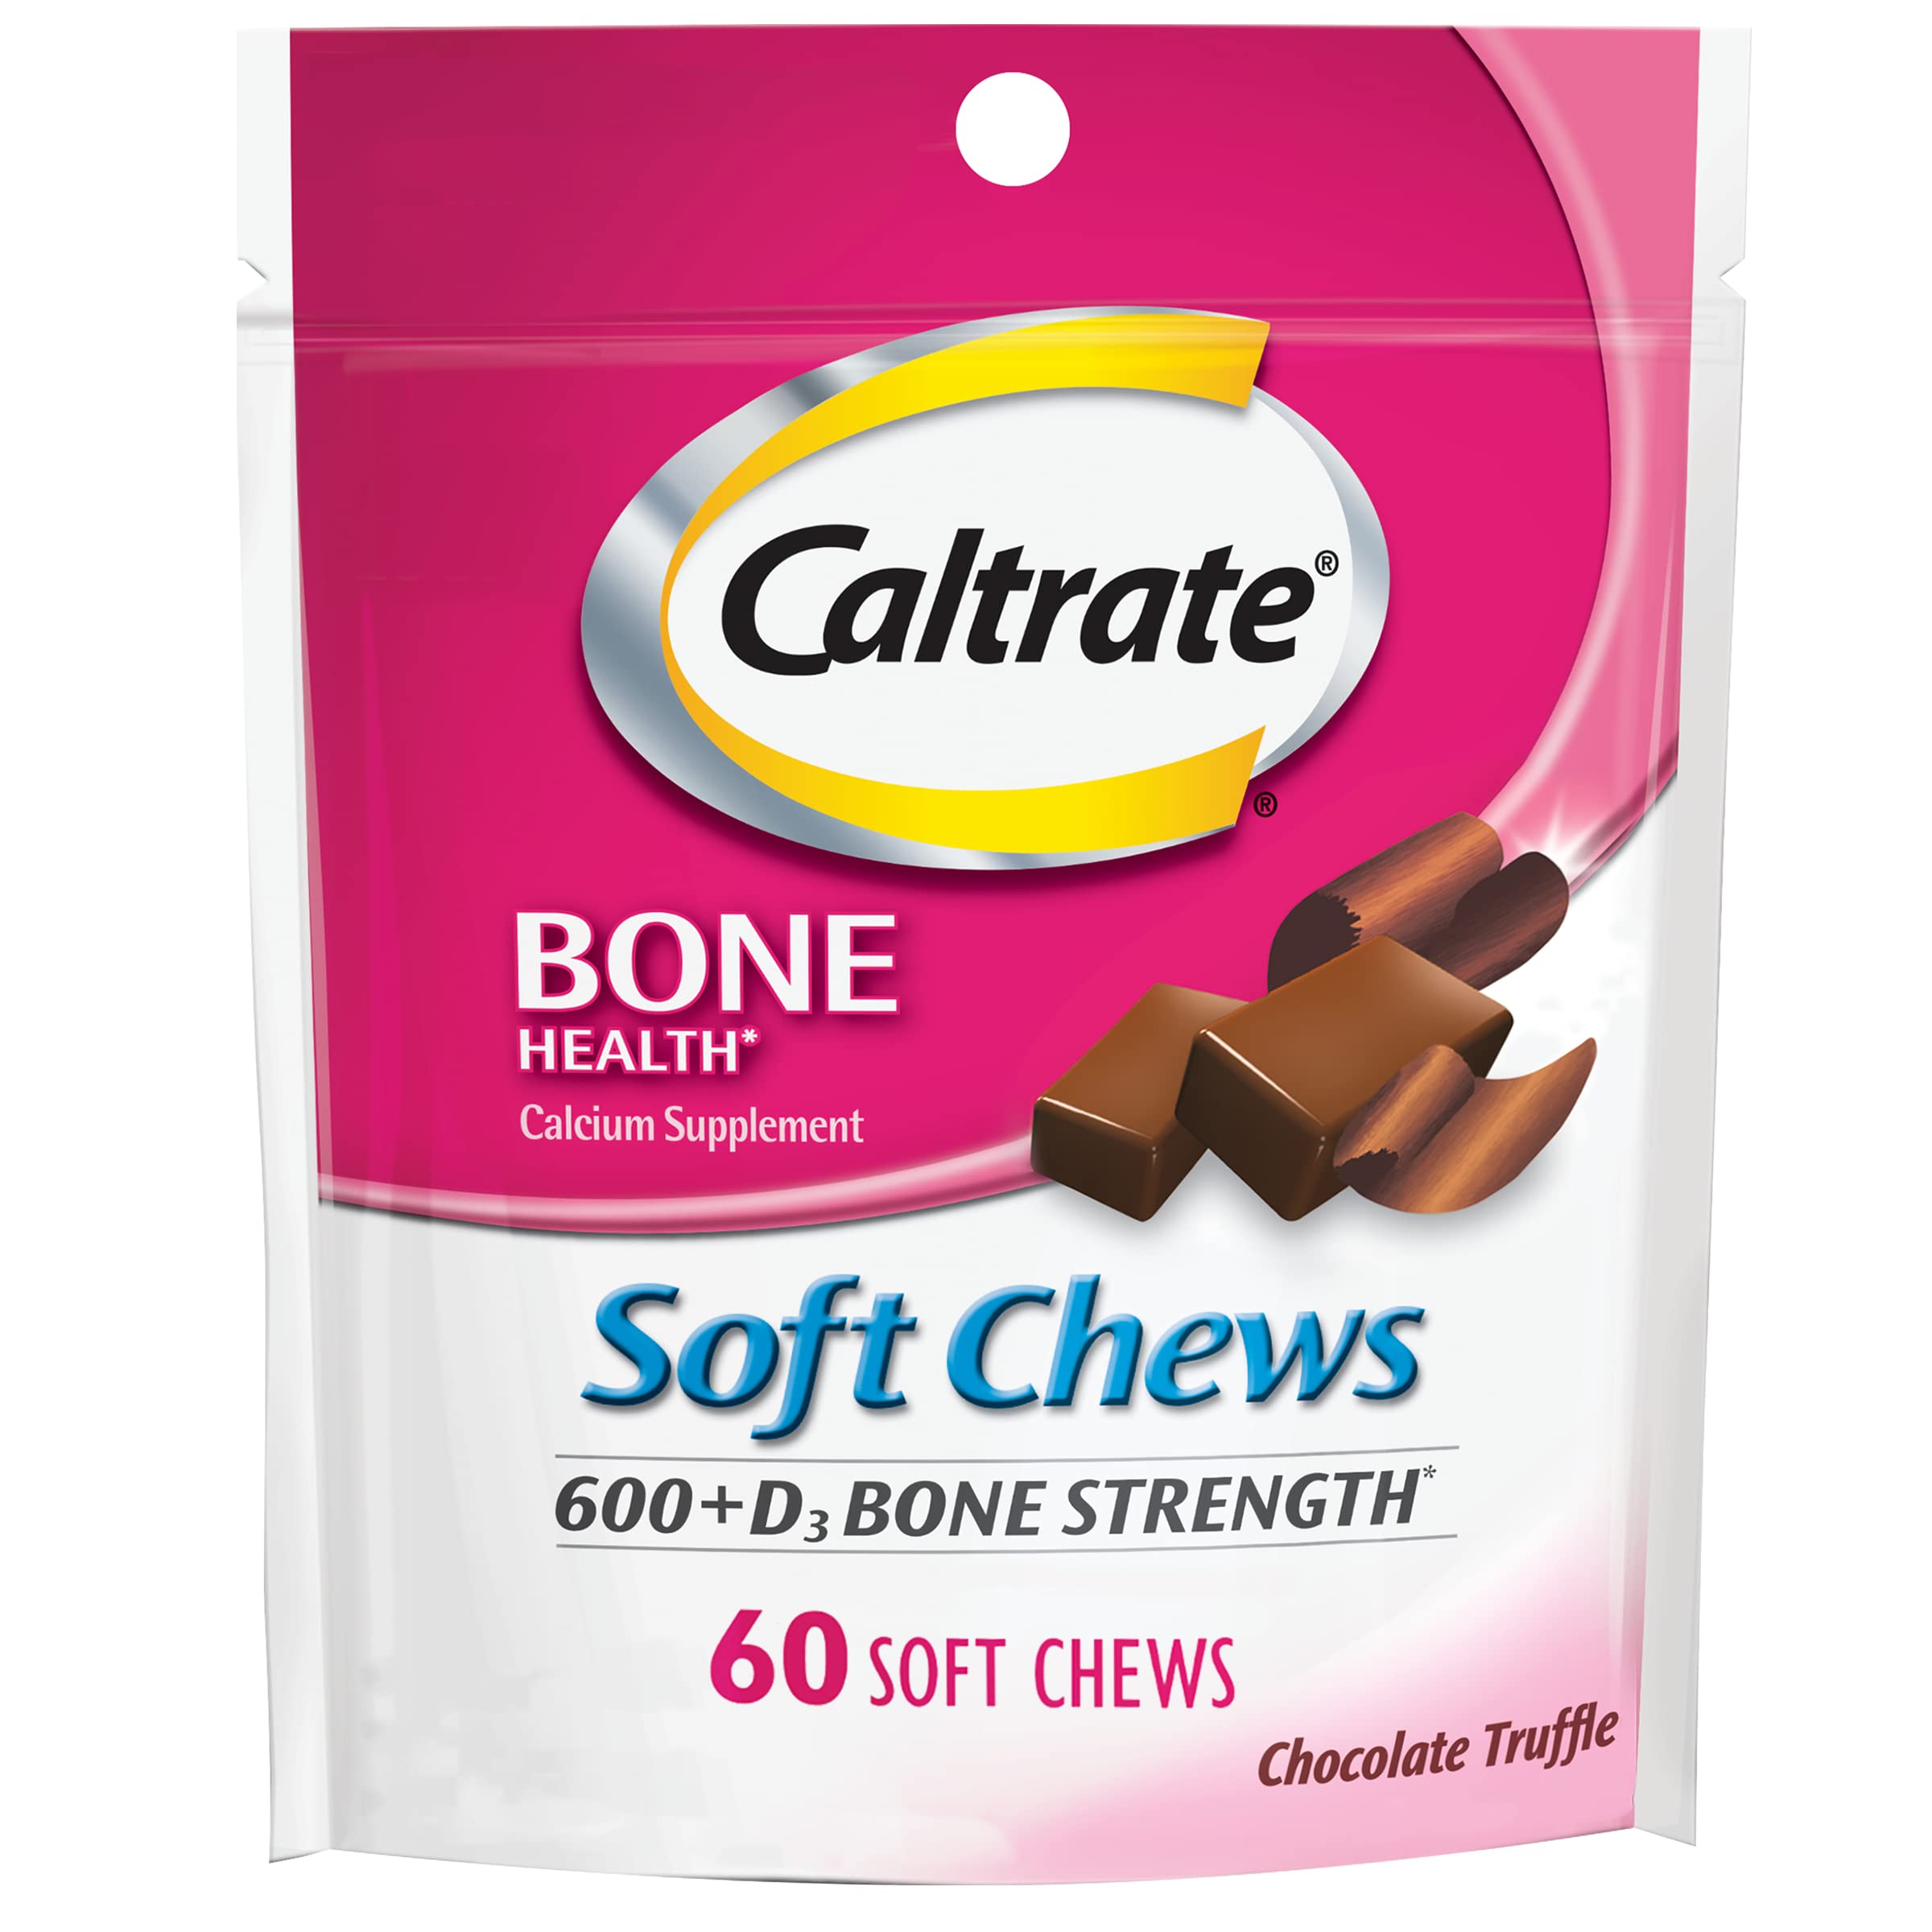 Caltrate Soft Chews 600 Plus D3 Calcium Vitamin D Supplement, Chocolate Truffle - 60 Count(Packaging May Vary)